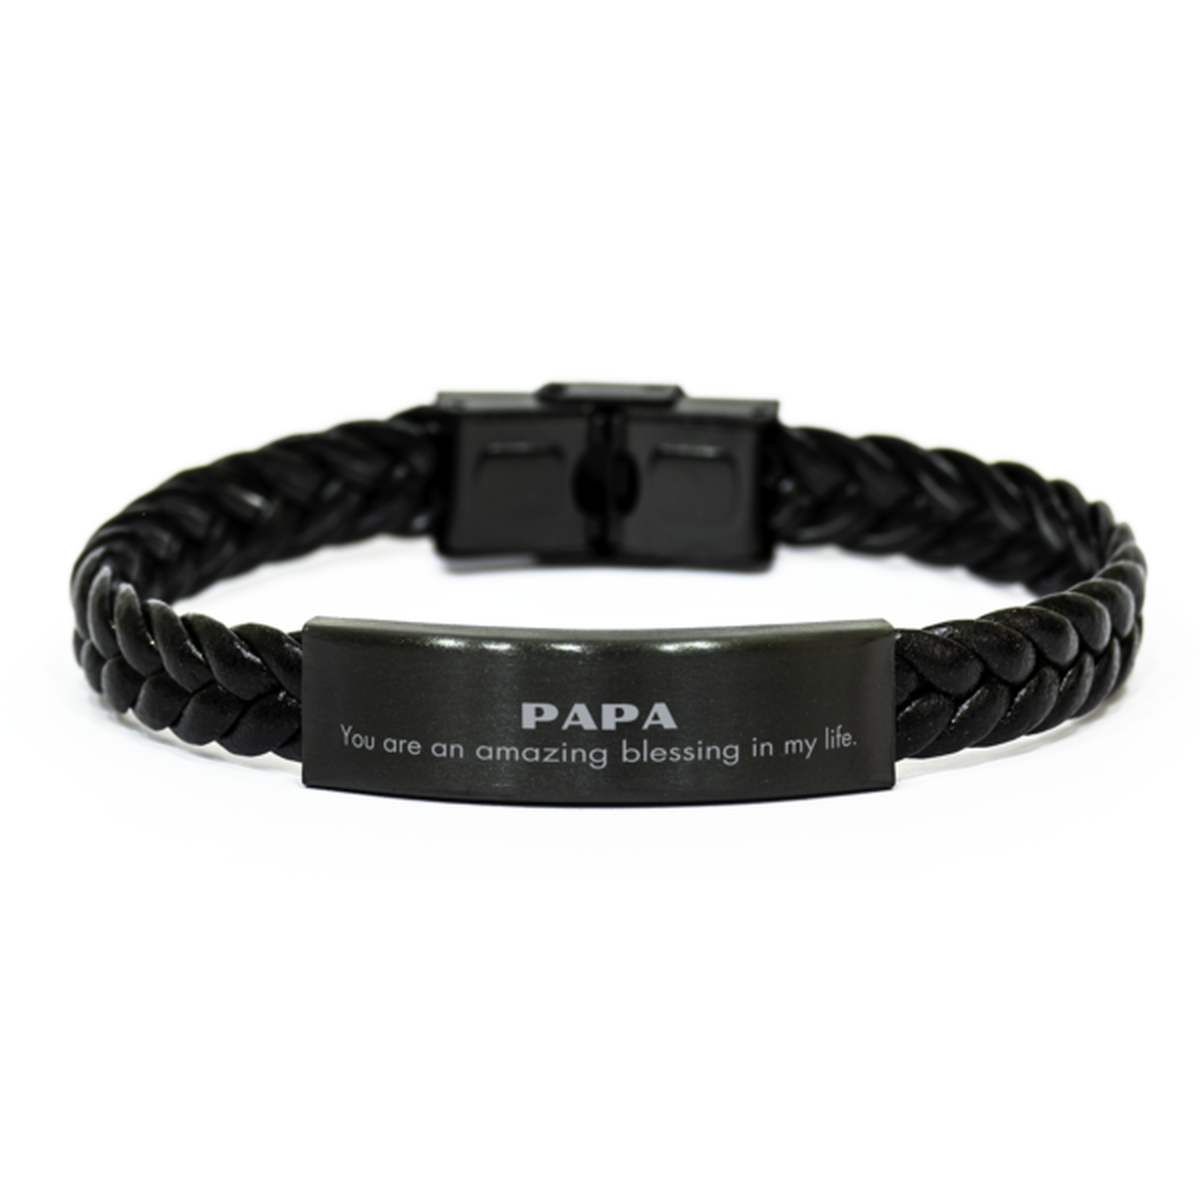 Papa Braided Leather Bracelet, You are an amazing blessing in my life, Thank You Gifts For Papa, Inspirational Birthday Christmas Unique Gifts For Papa